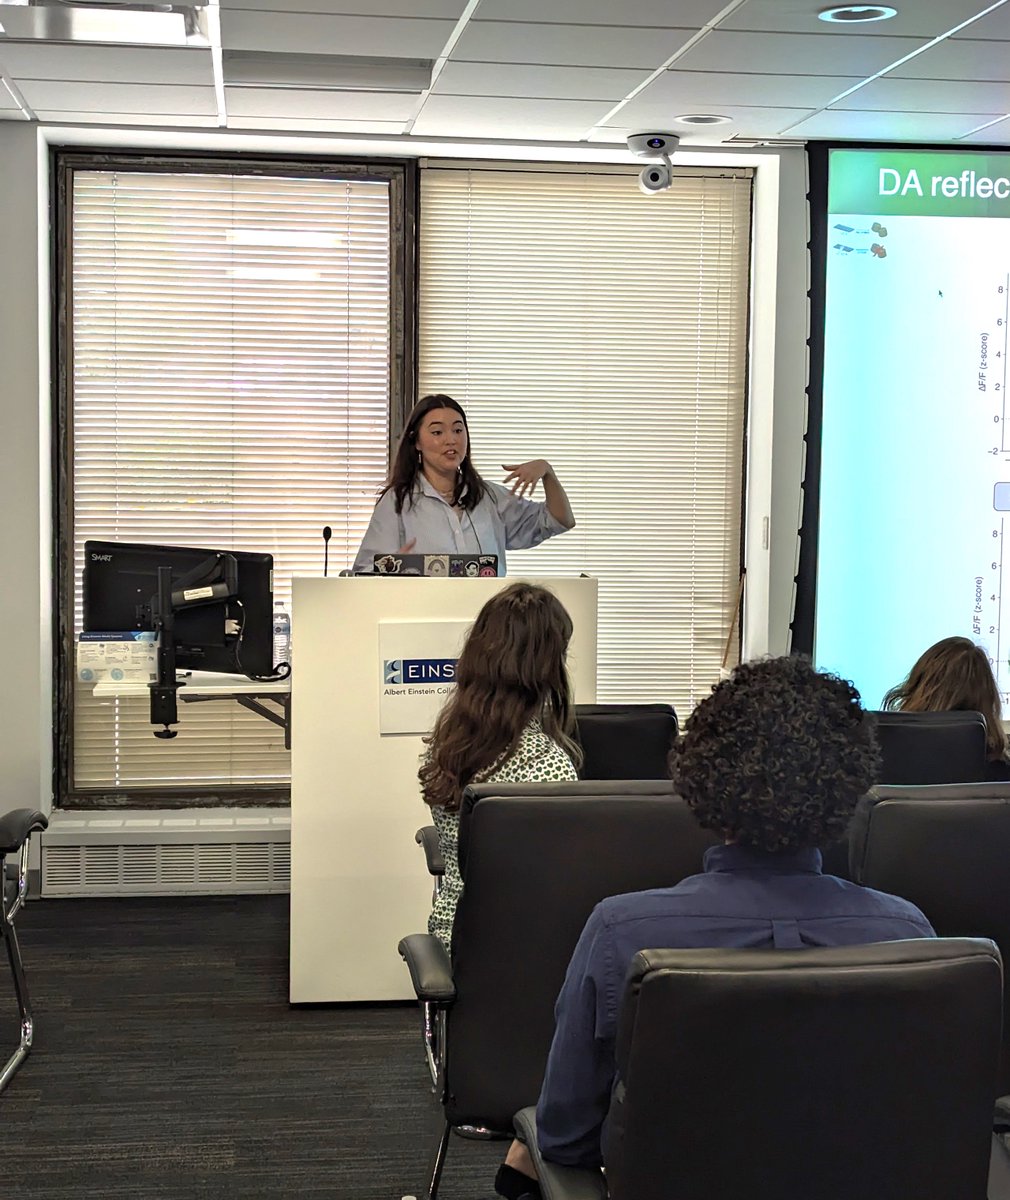 2/2 Participants from institutions across the northeast presented research, shared career strategies, and networked with fellow students, postdocs, and research faculty. #postdoc #postdocpositions #postdocjobs